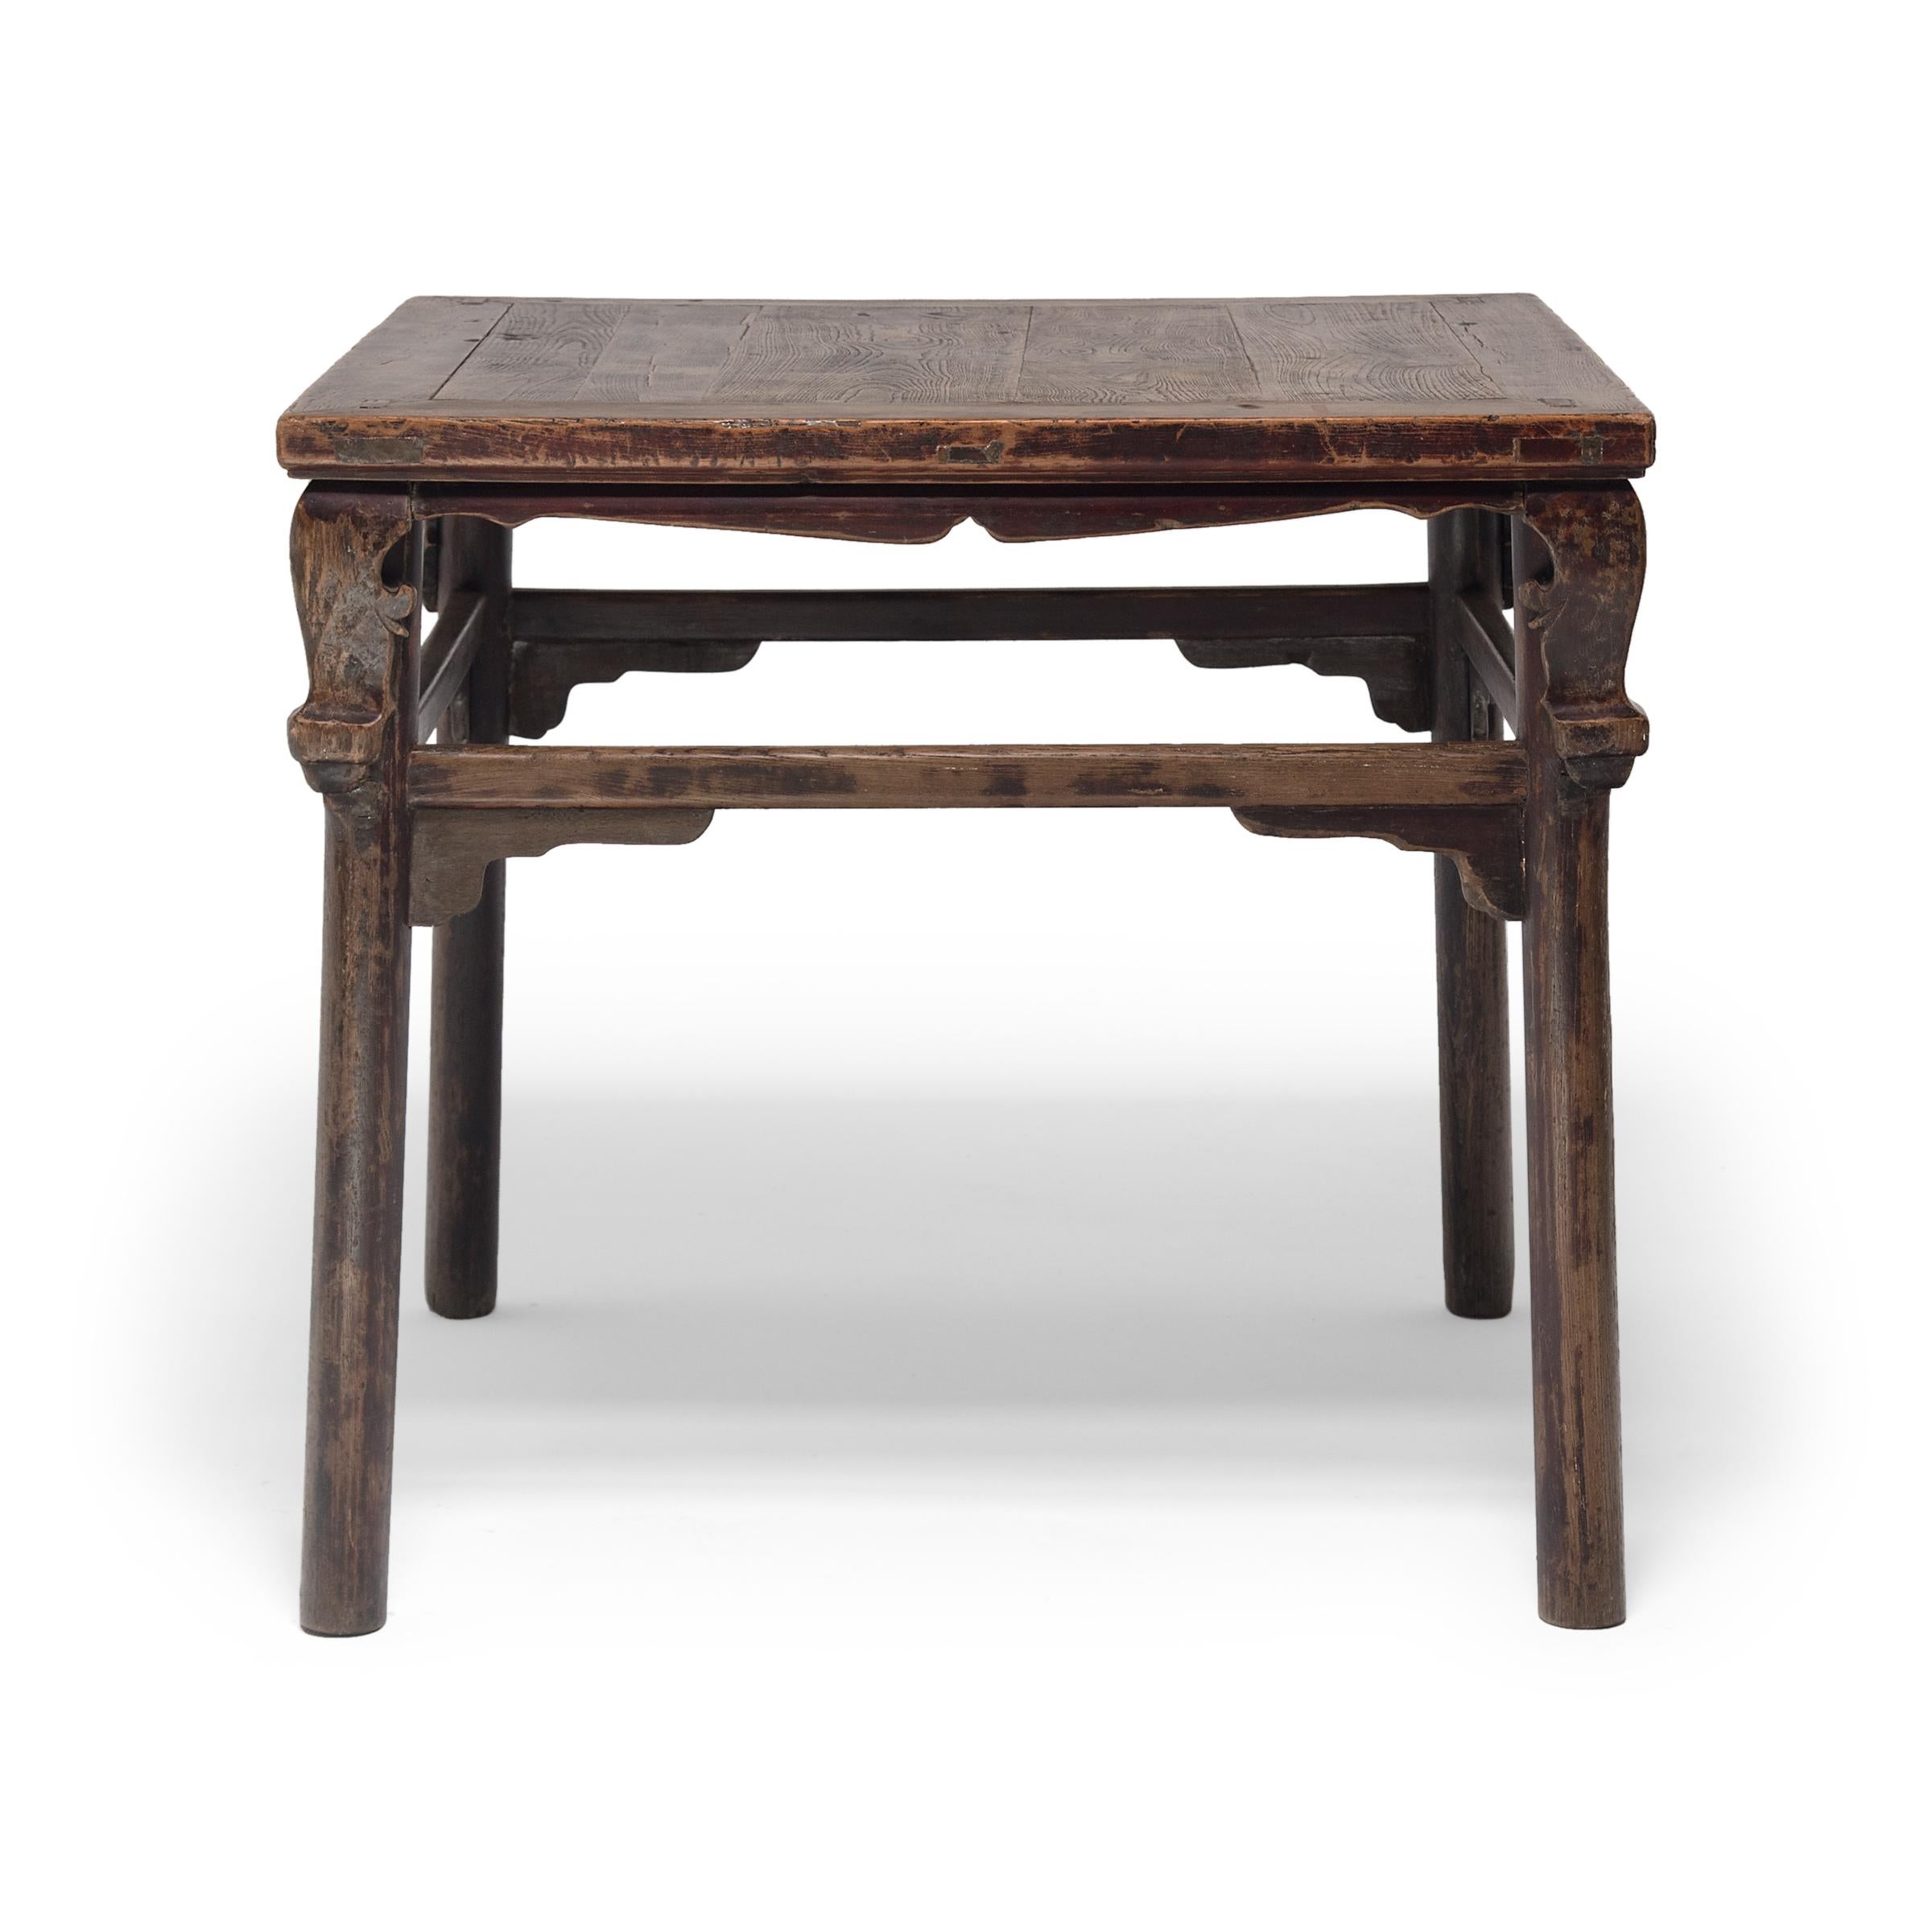 Qing Chinese Square Display Table with Scroll Corners, circa 1850 For Sale